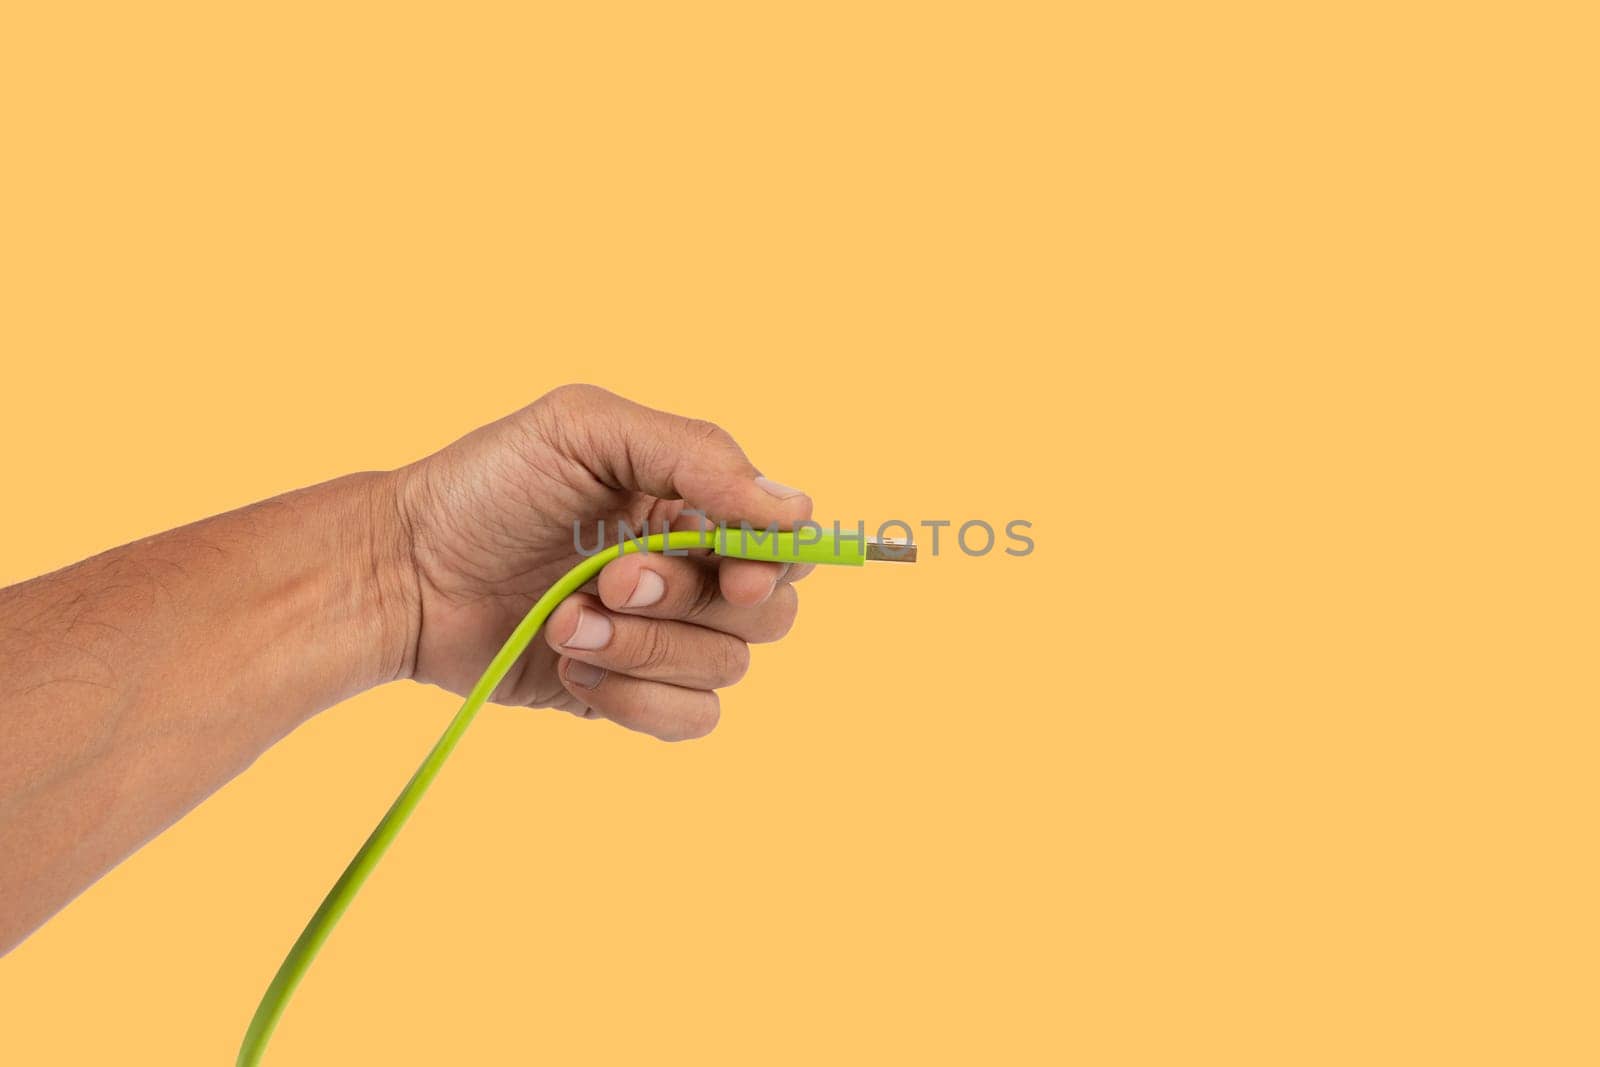 Black male hand holding a green USB cable isolated on yellow background. High quality photo